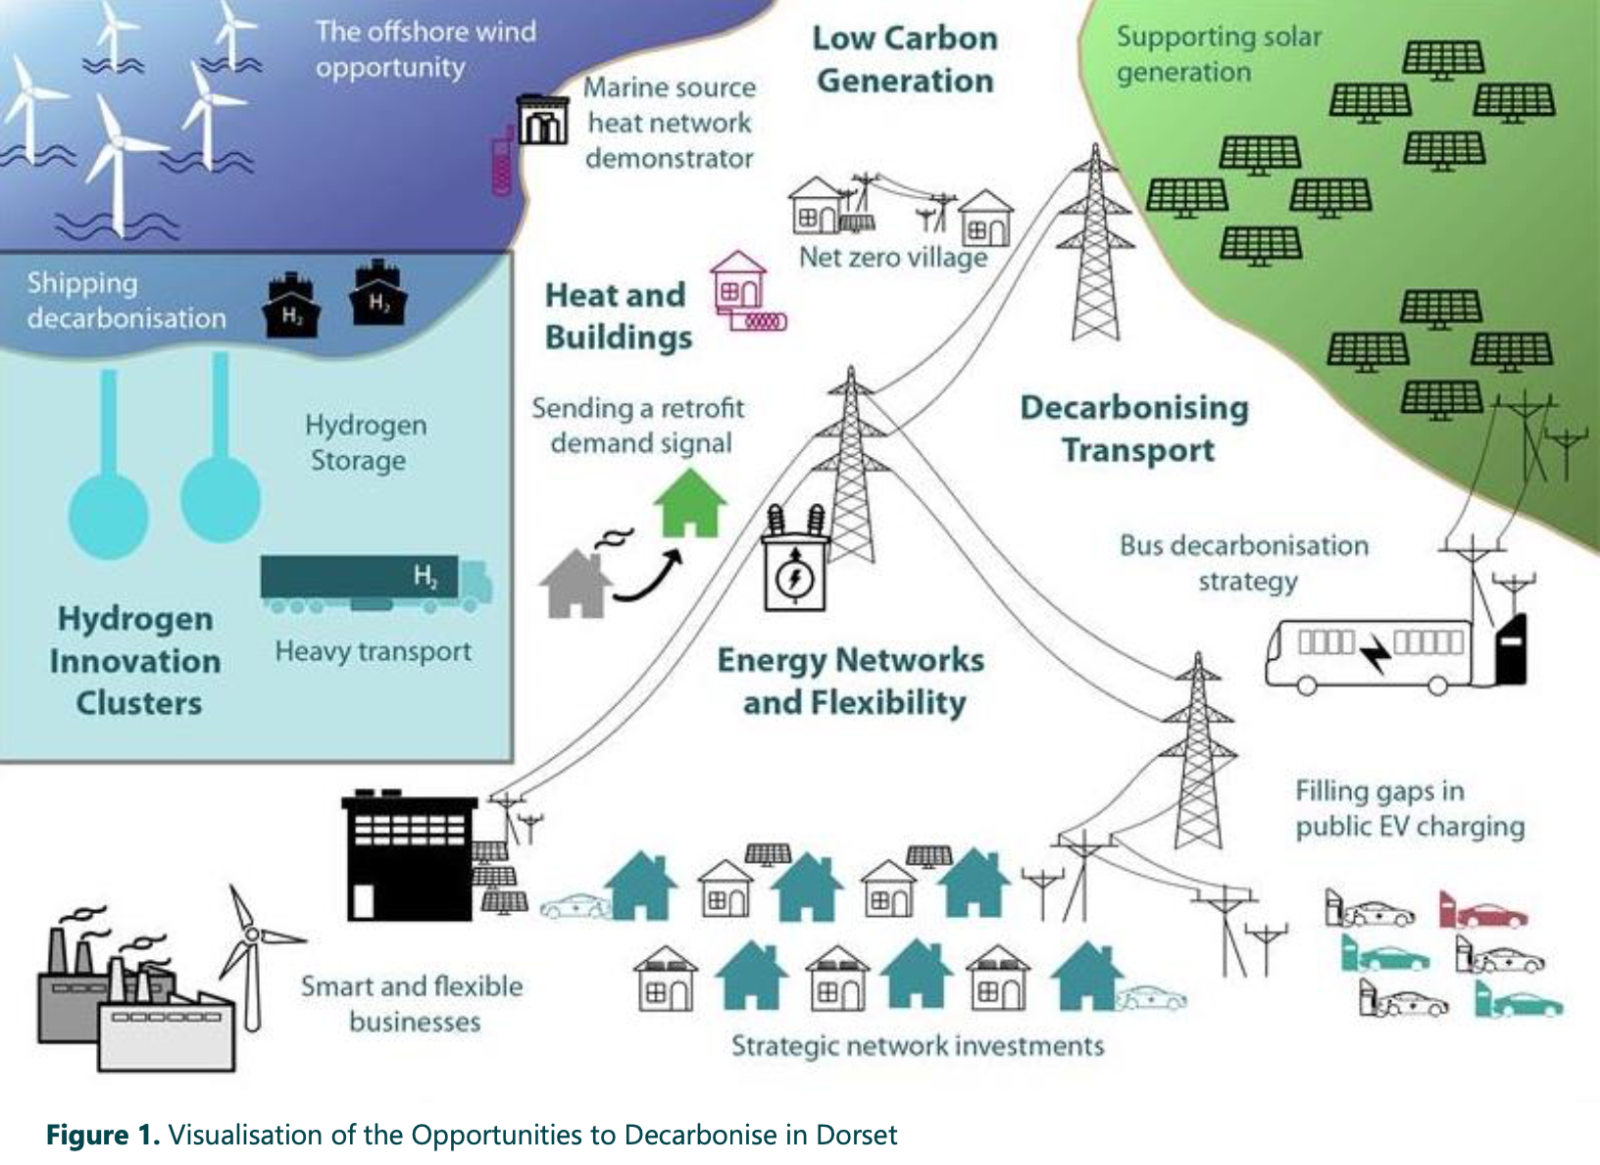 Visualisation of the Opportunities to Decarbonise Dorset